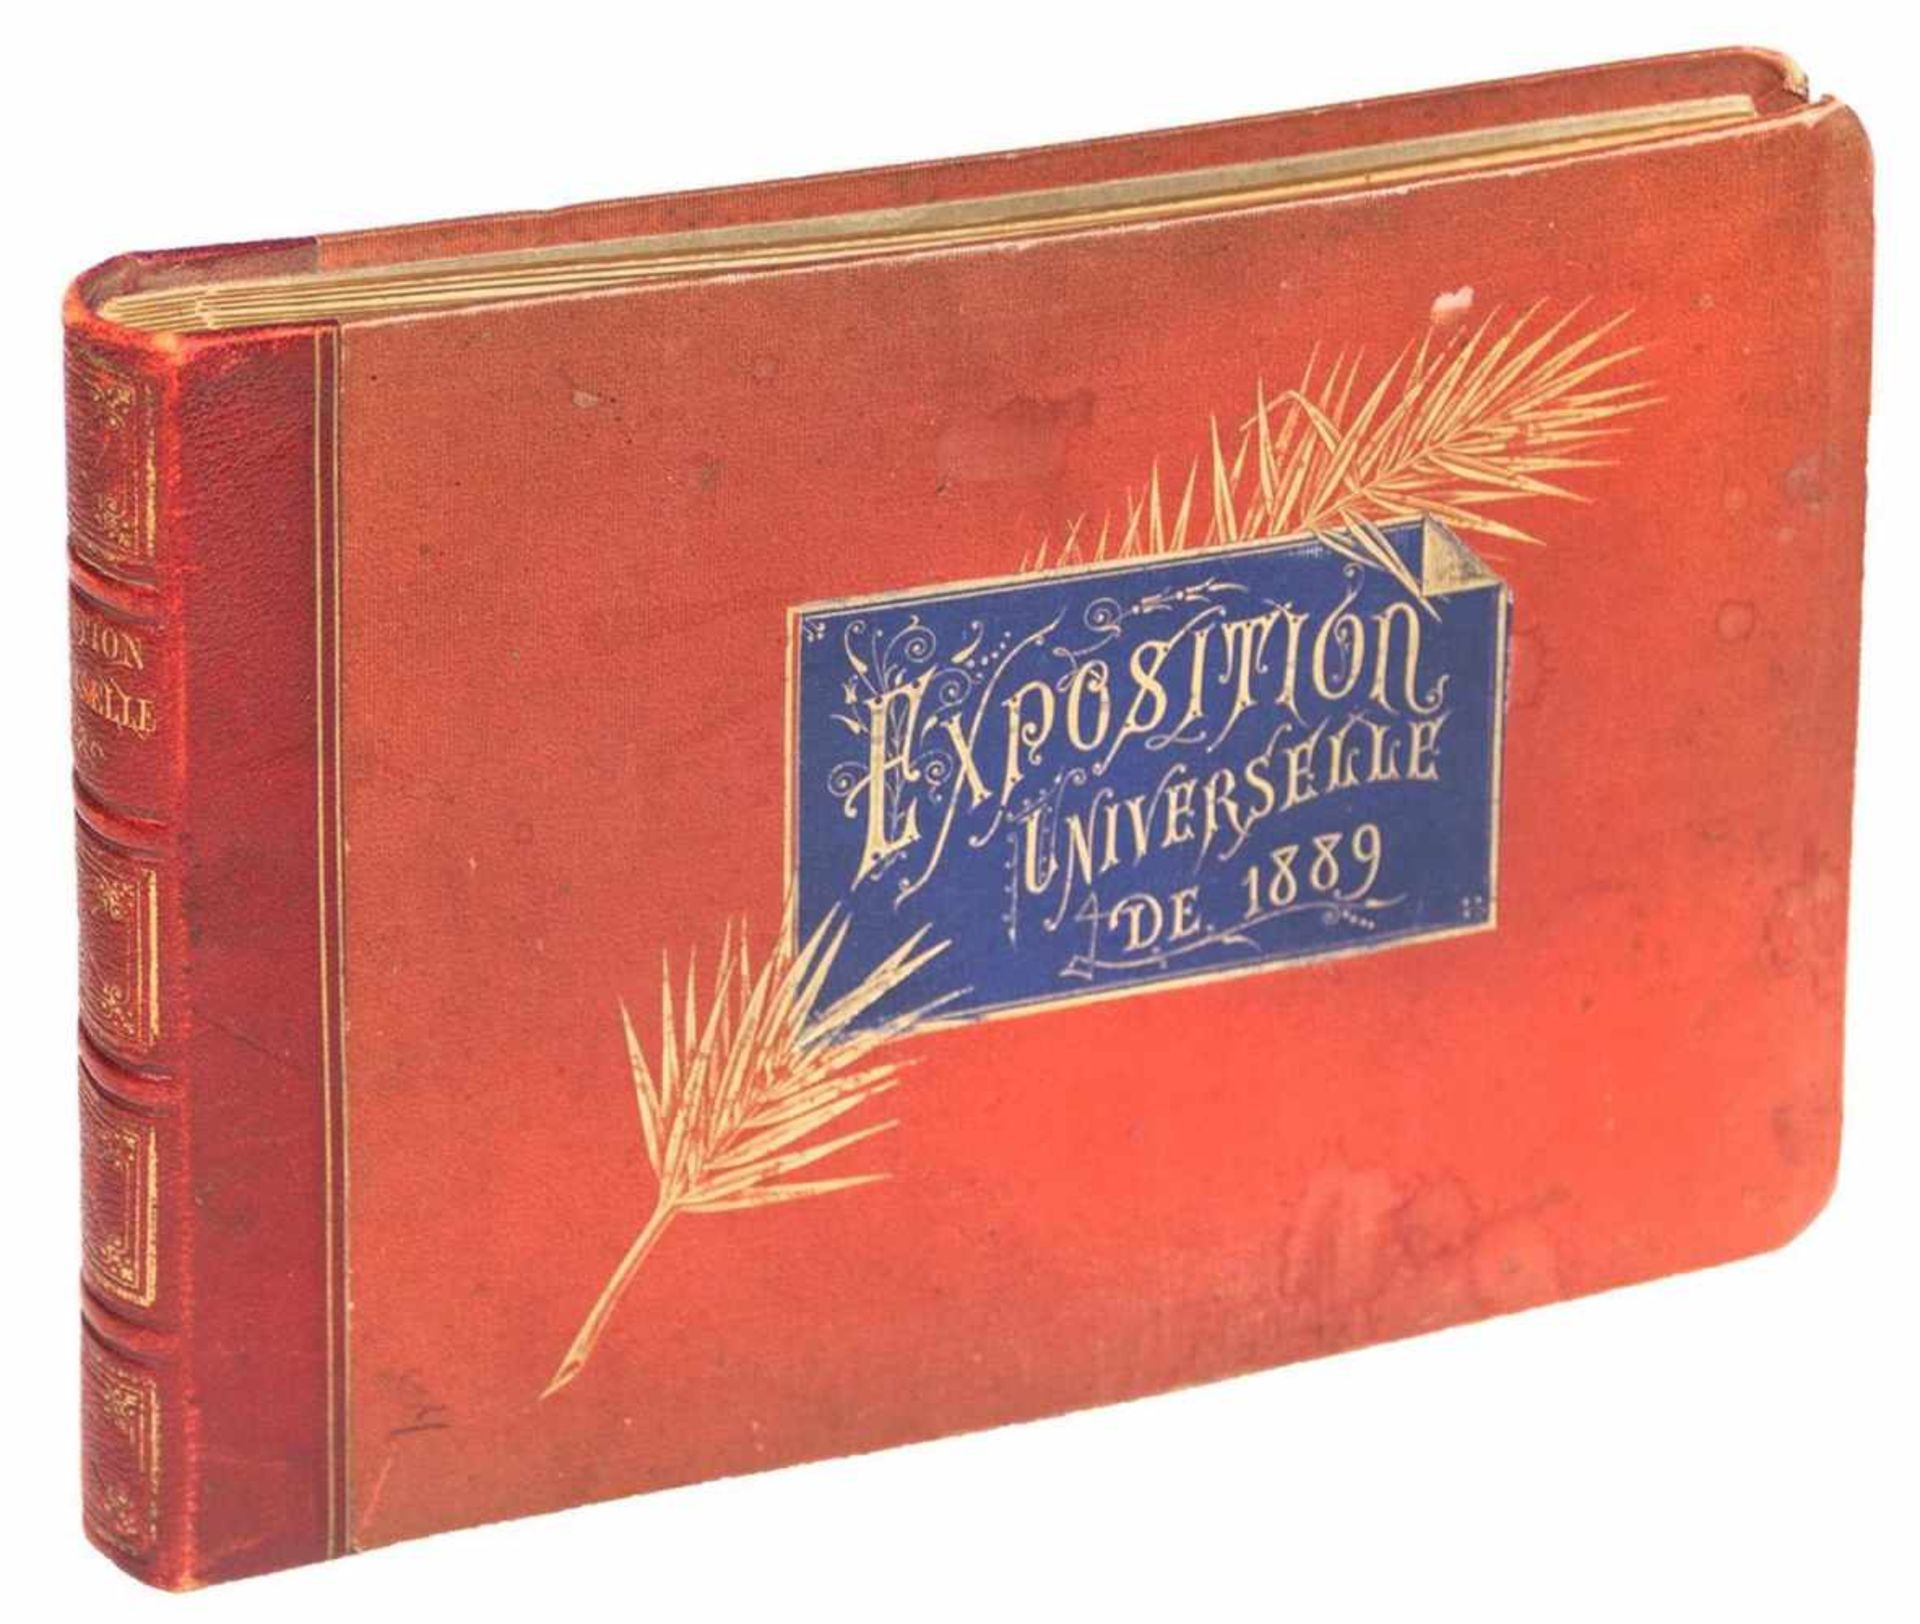 Exposition Universelle. 1889. Paris. 27x18,5 cm. France. In the composite cover with gold lettering.